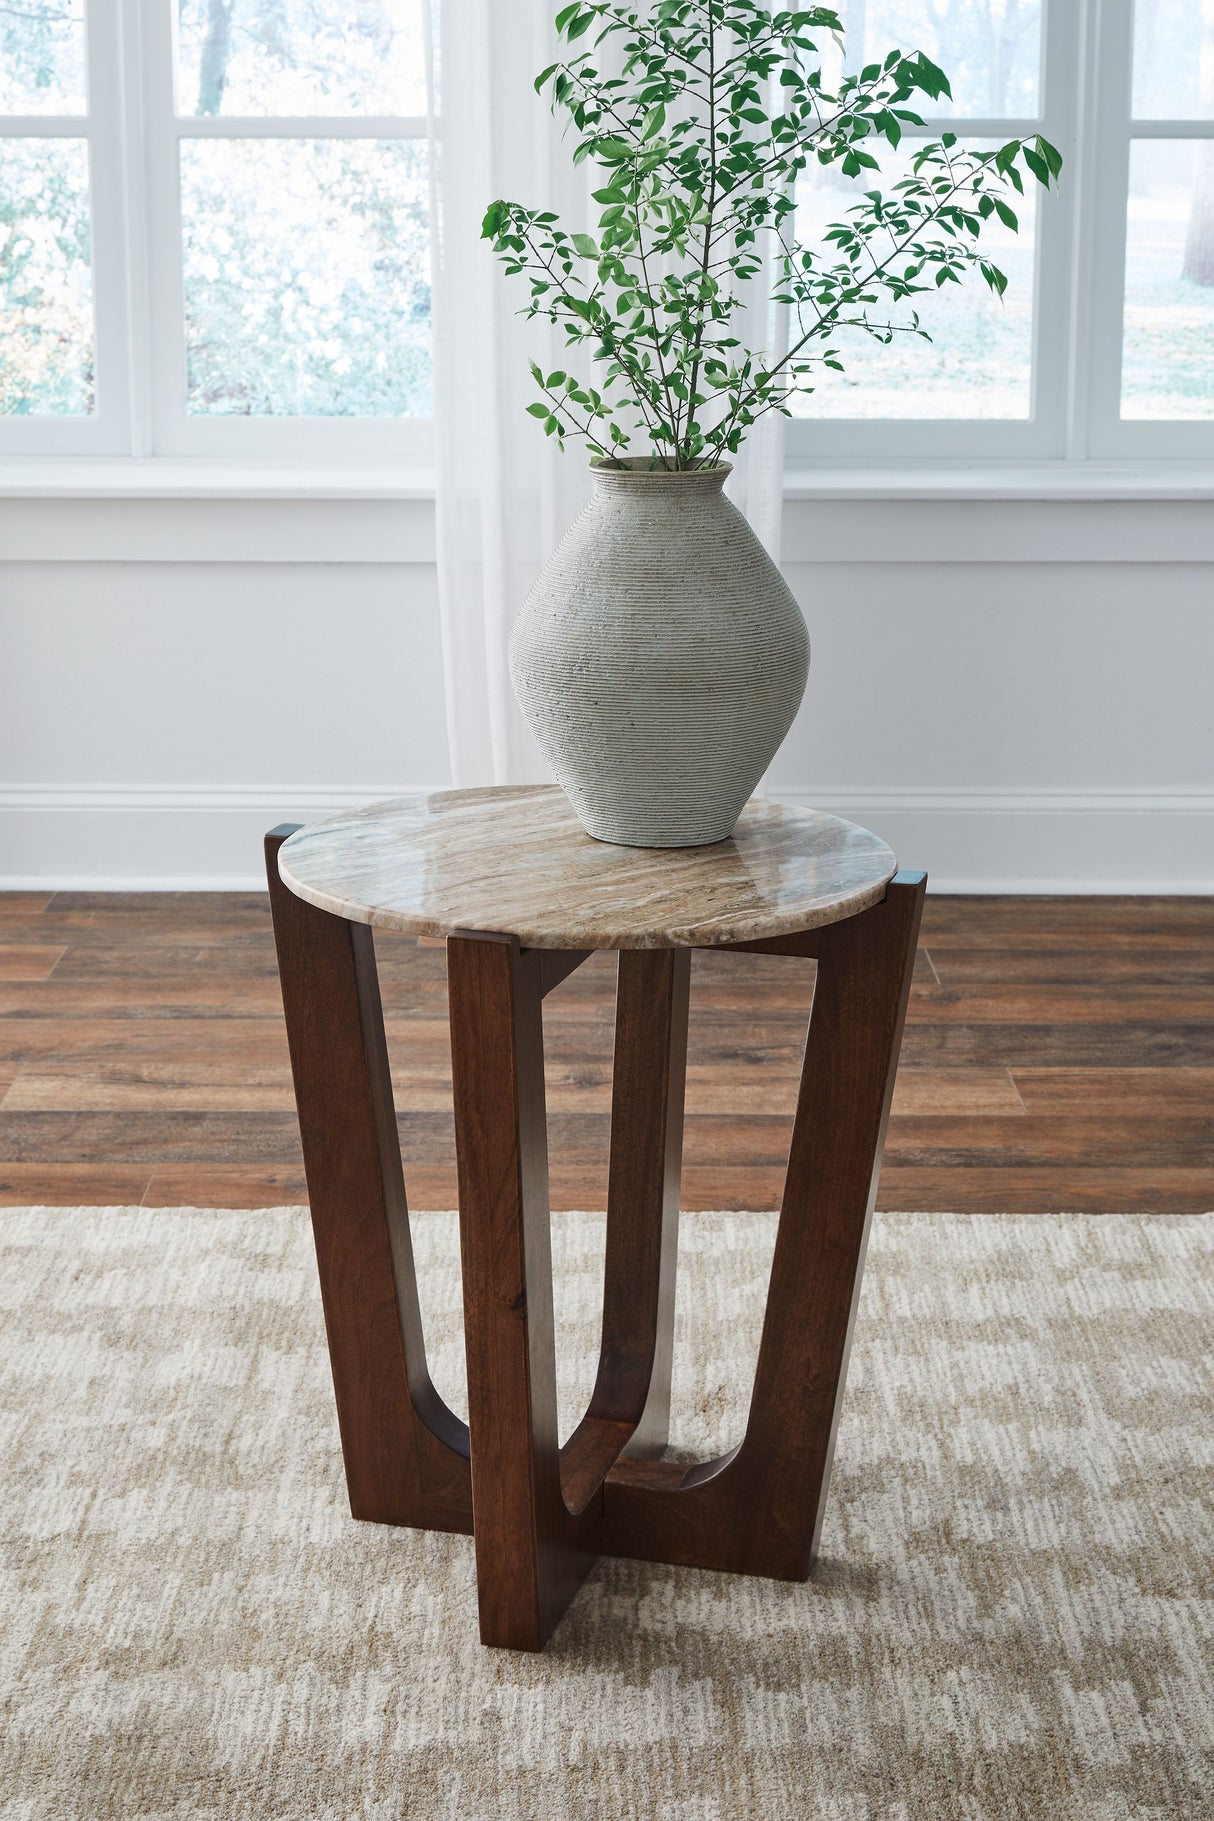 Tanidore - Warm Brown - Round End Table